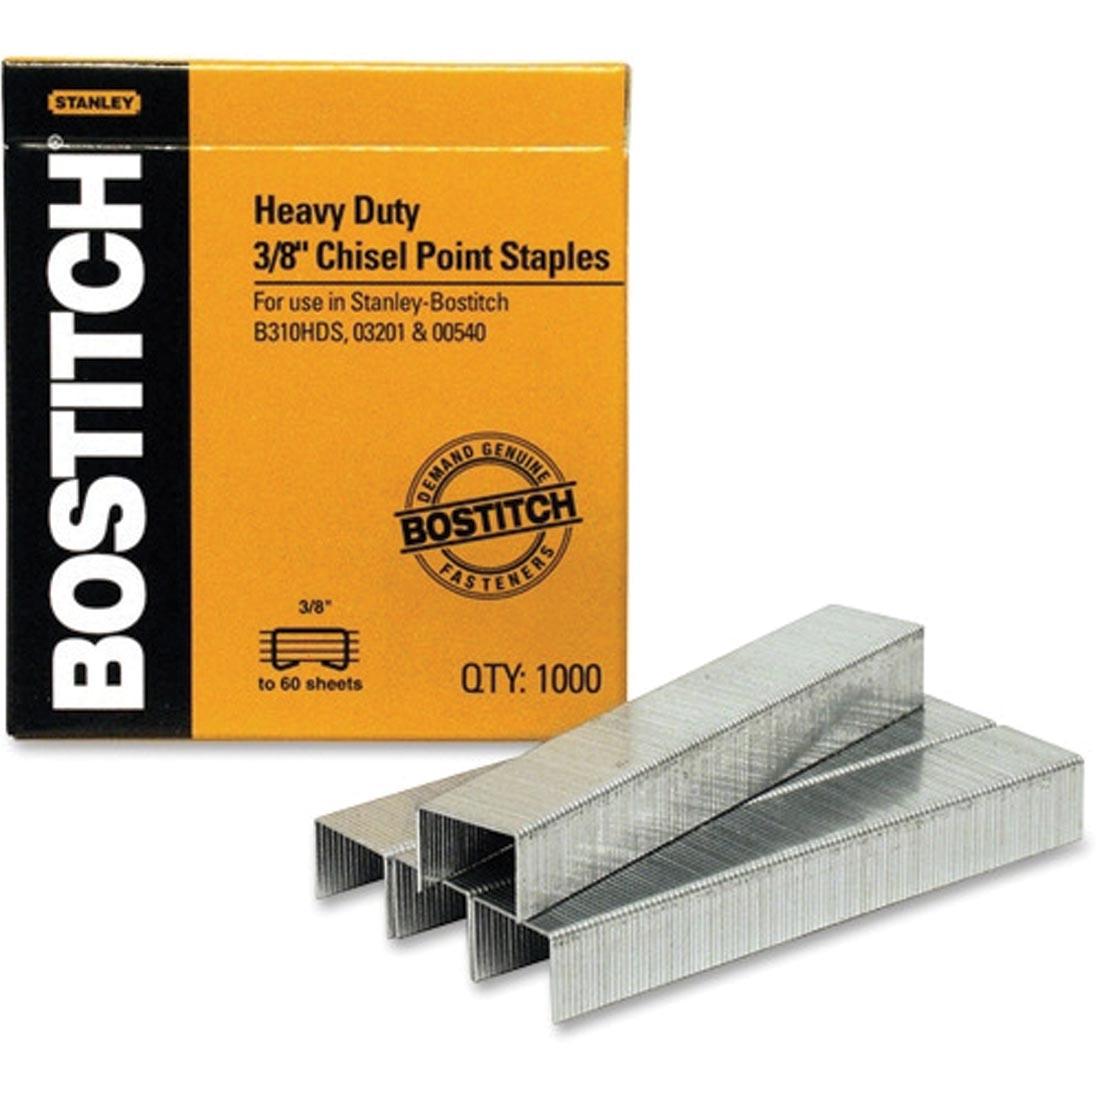 Strips of Bostitch Heavy-Duty Staples shown outside their box